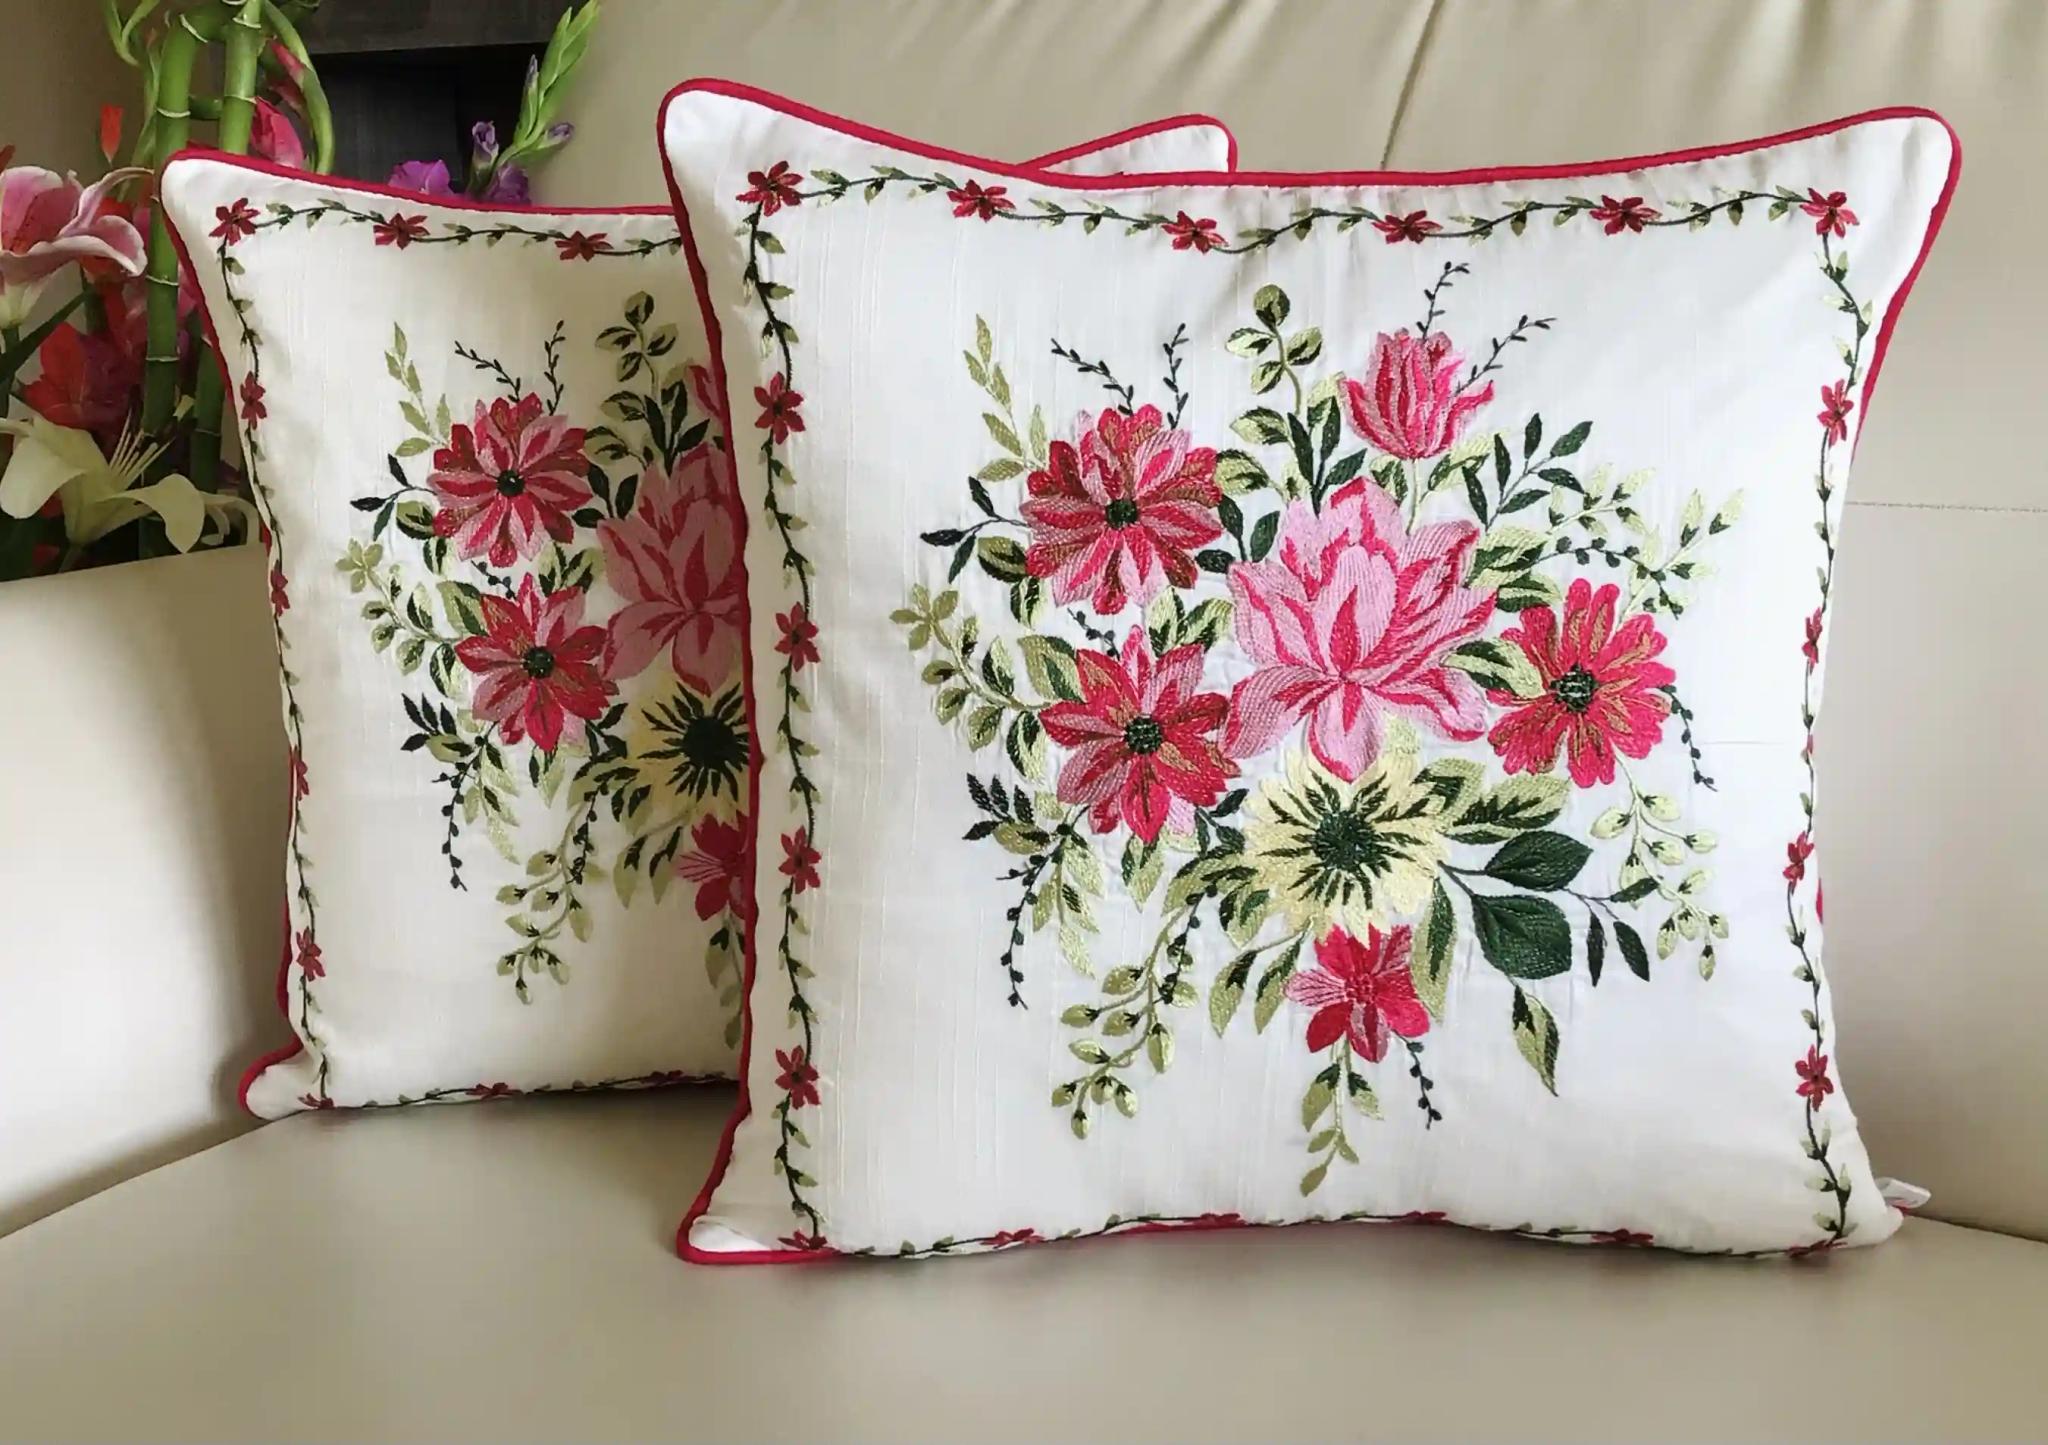 My Fairy Lady- Embroidered Cotton Silk Cushion Covers- Set of 2- Fuchsia Pink